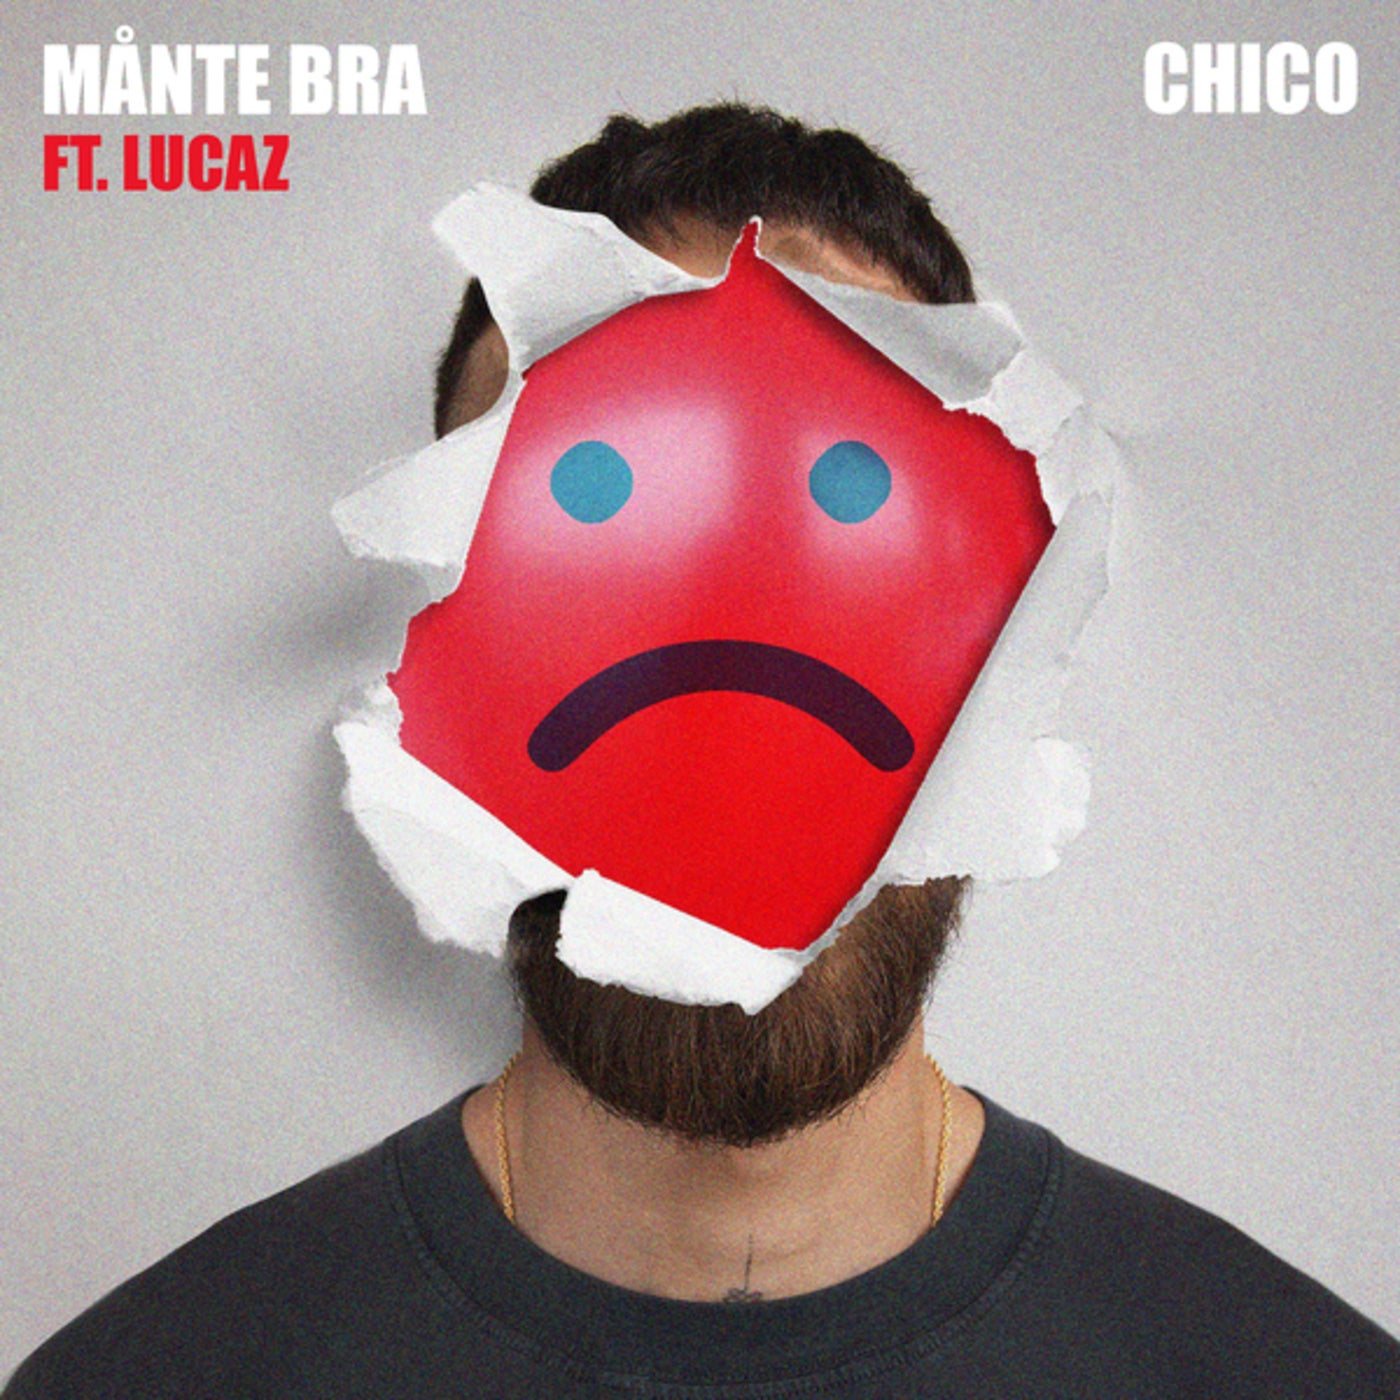 MÅNTE BRA by Chico and Immanuel on Beatsource